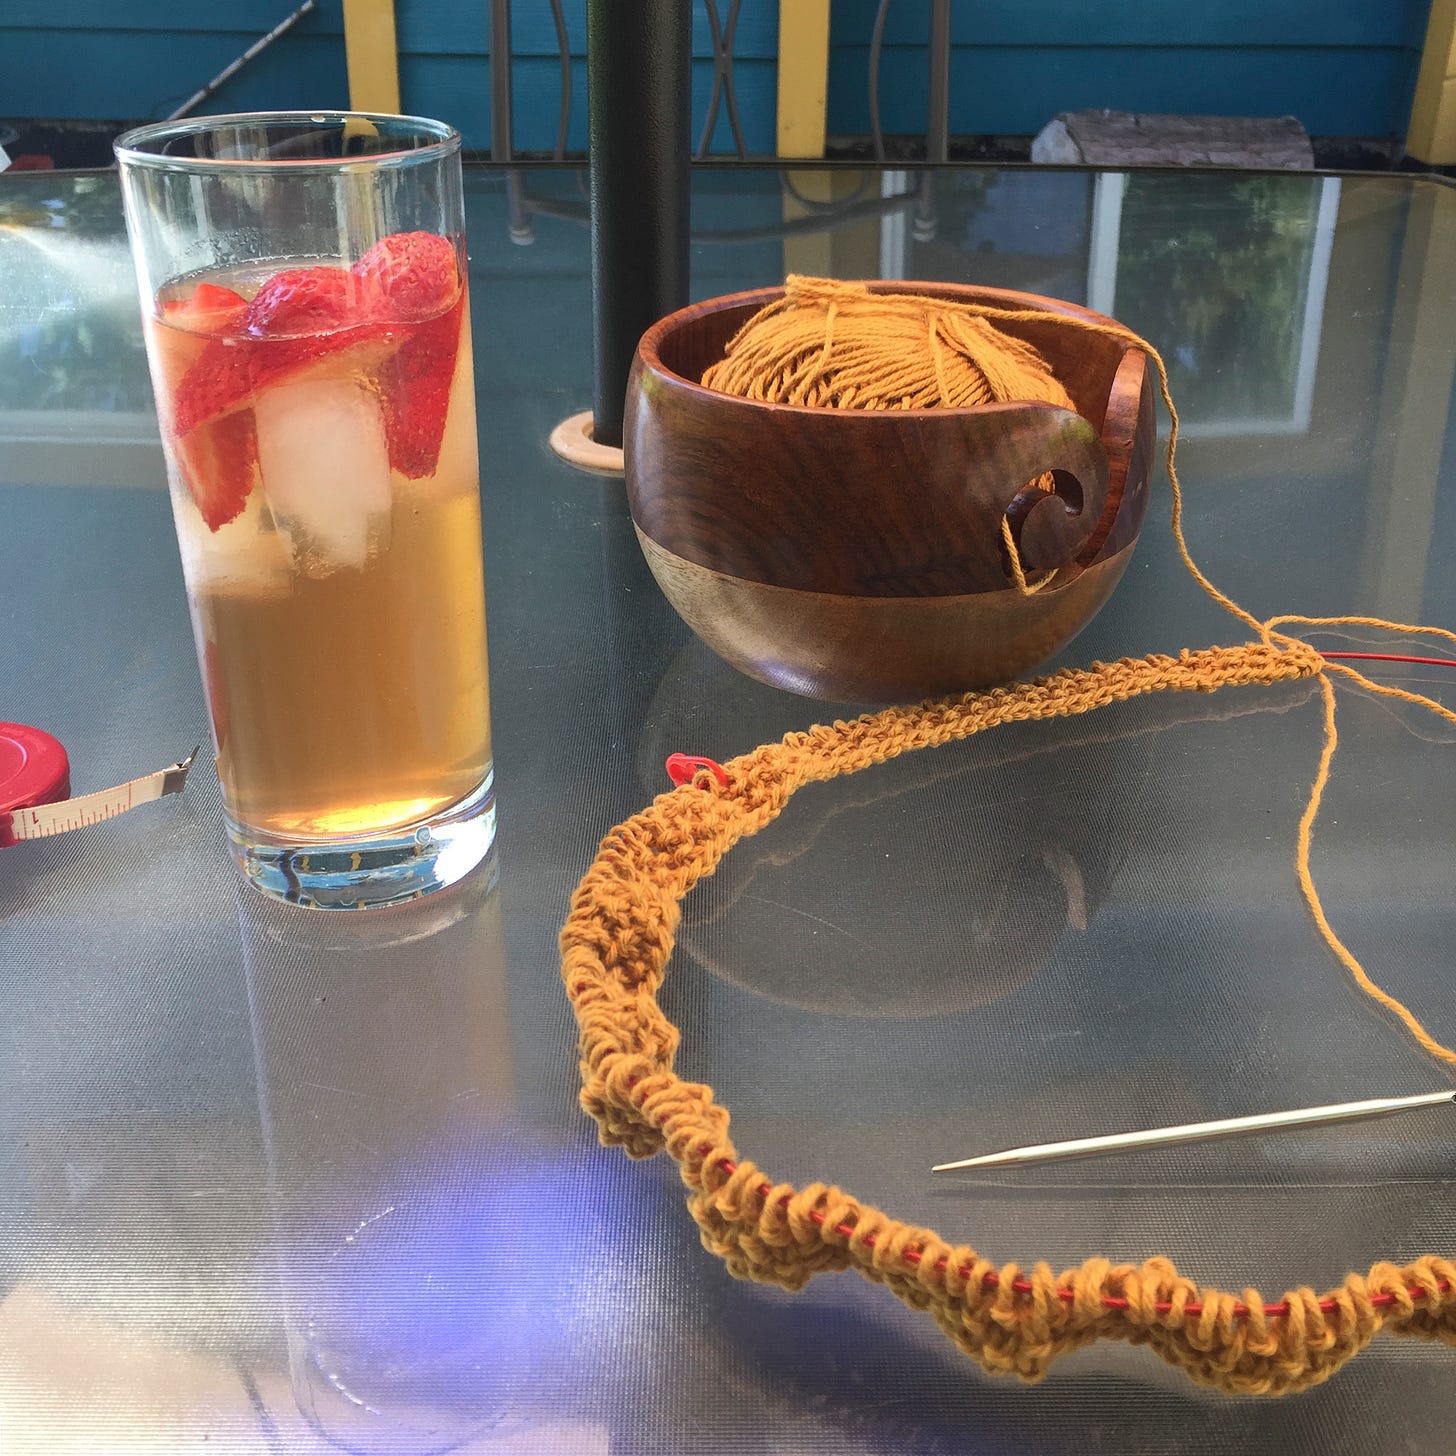 On an outdoor table is a Collins glass of iced tea with ice cubes and pieces of strawberry. Next to it is a two-toned wooden yarn bowl and a few rows of mustard yellow knitting on long circular needles.